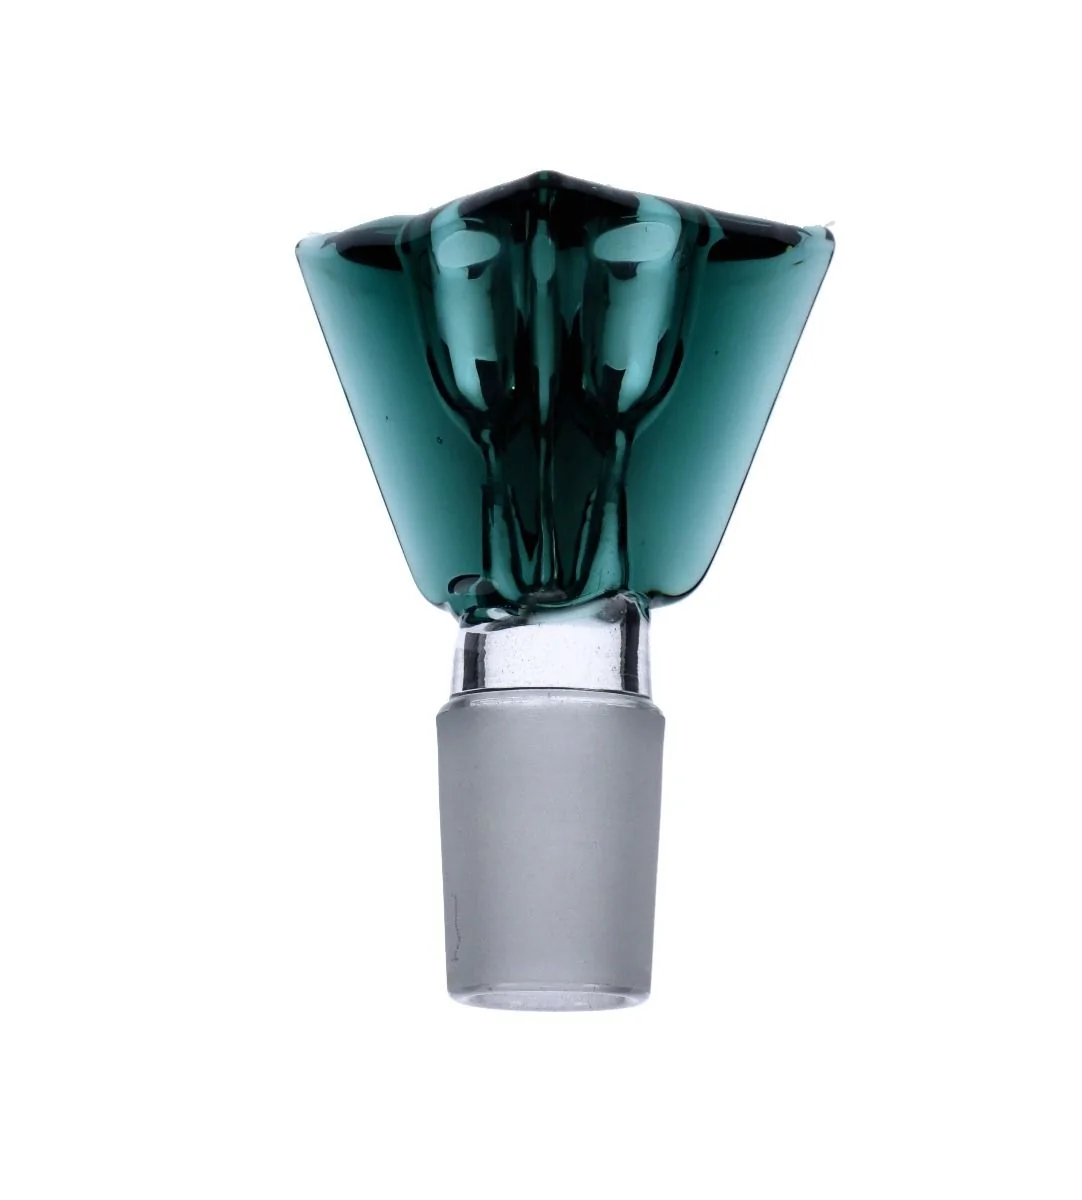 New teal color leaf Glass water bong pipe comes with 14mm male bowl piece bongs